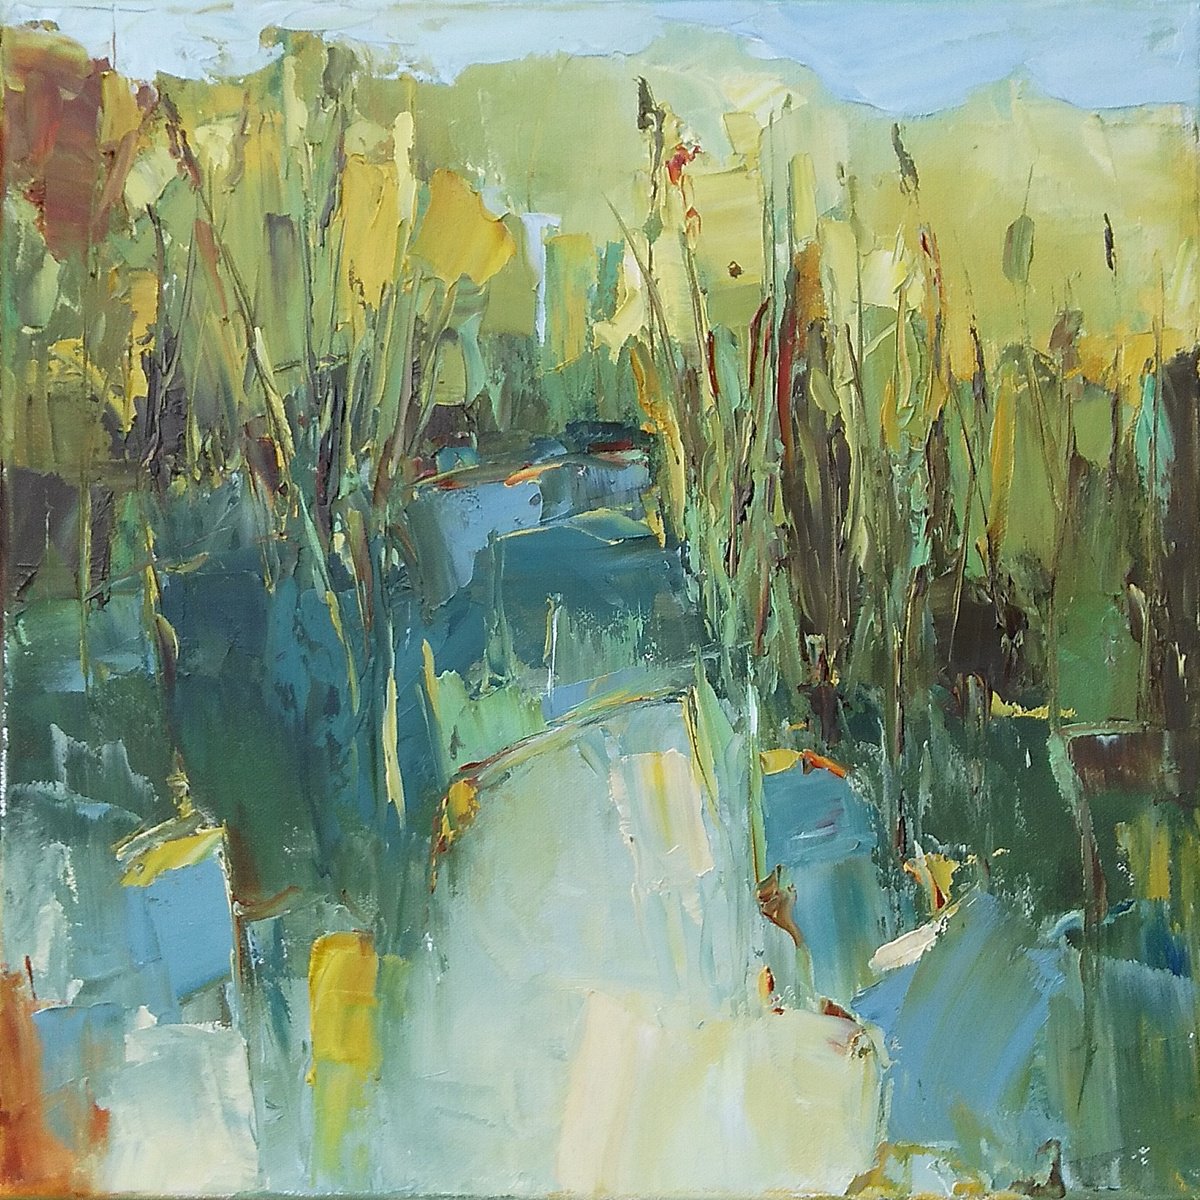 SIMPLE CHARMS, 40x40cm, spring water reflections landscape by Emilia Milcheva